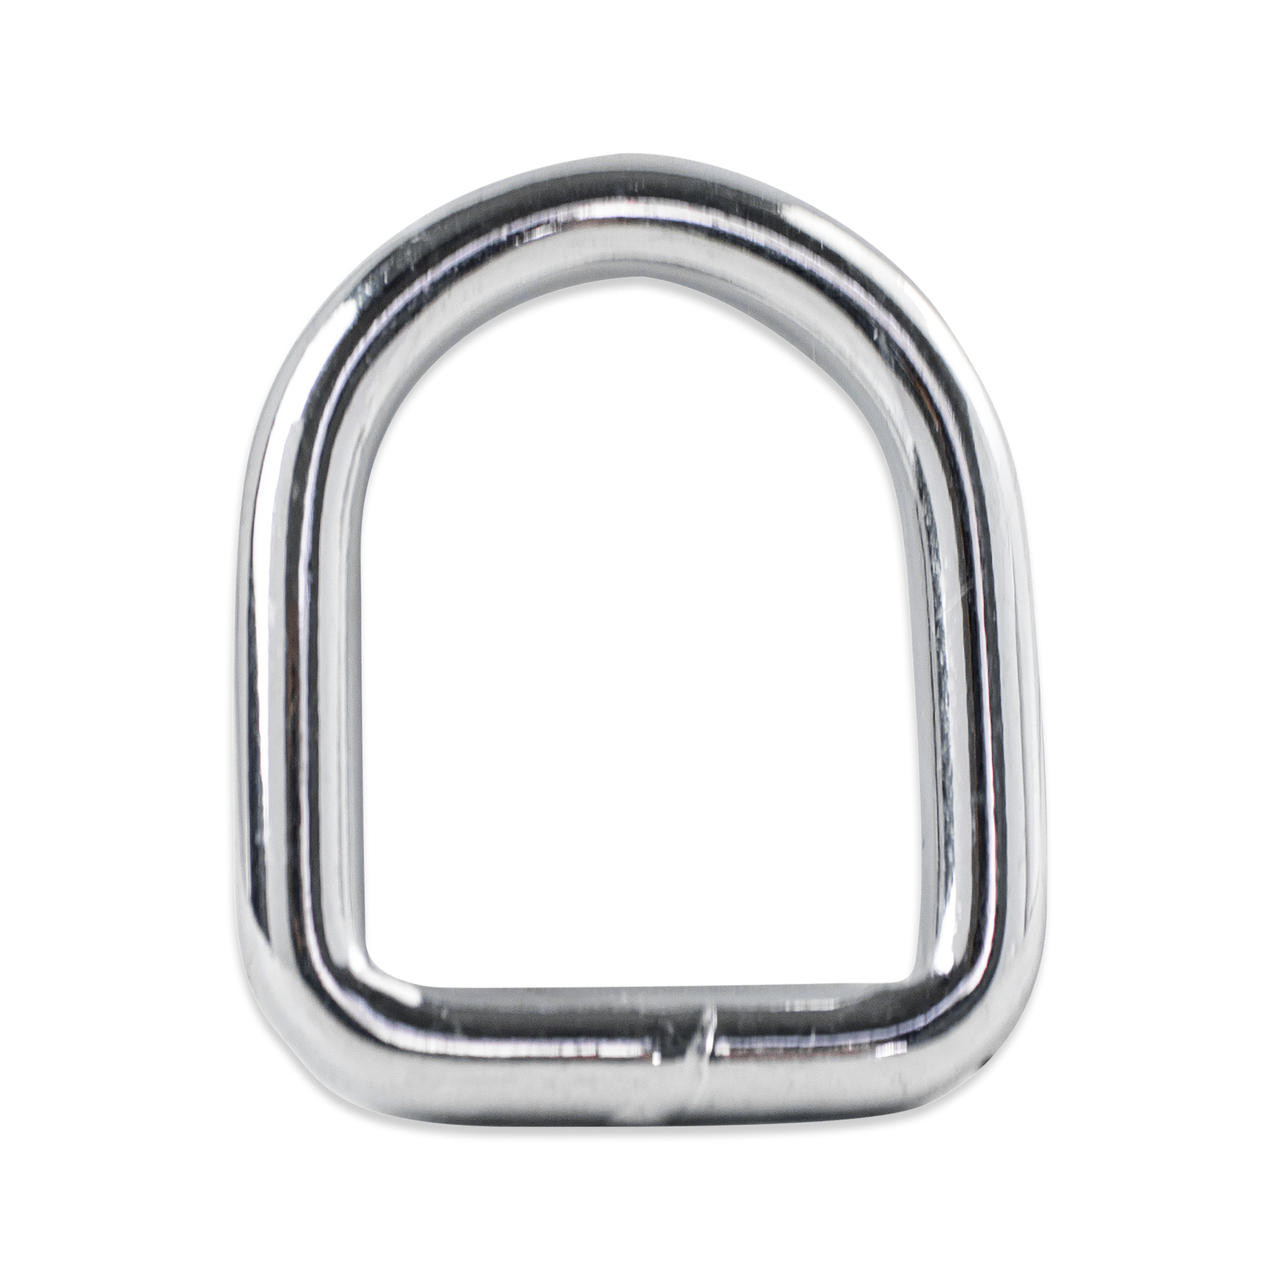 Stainless Steel D Ring Tie Down Anchors 3,500 Capacity